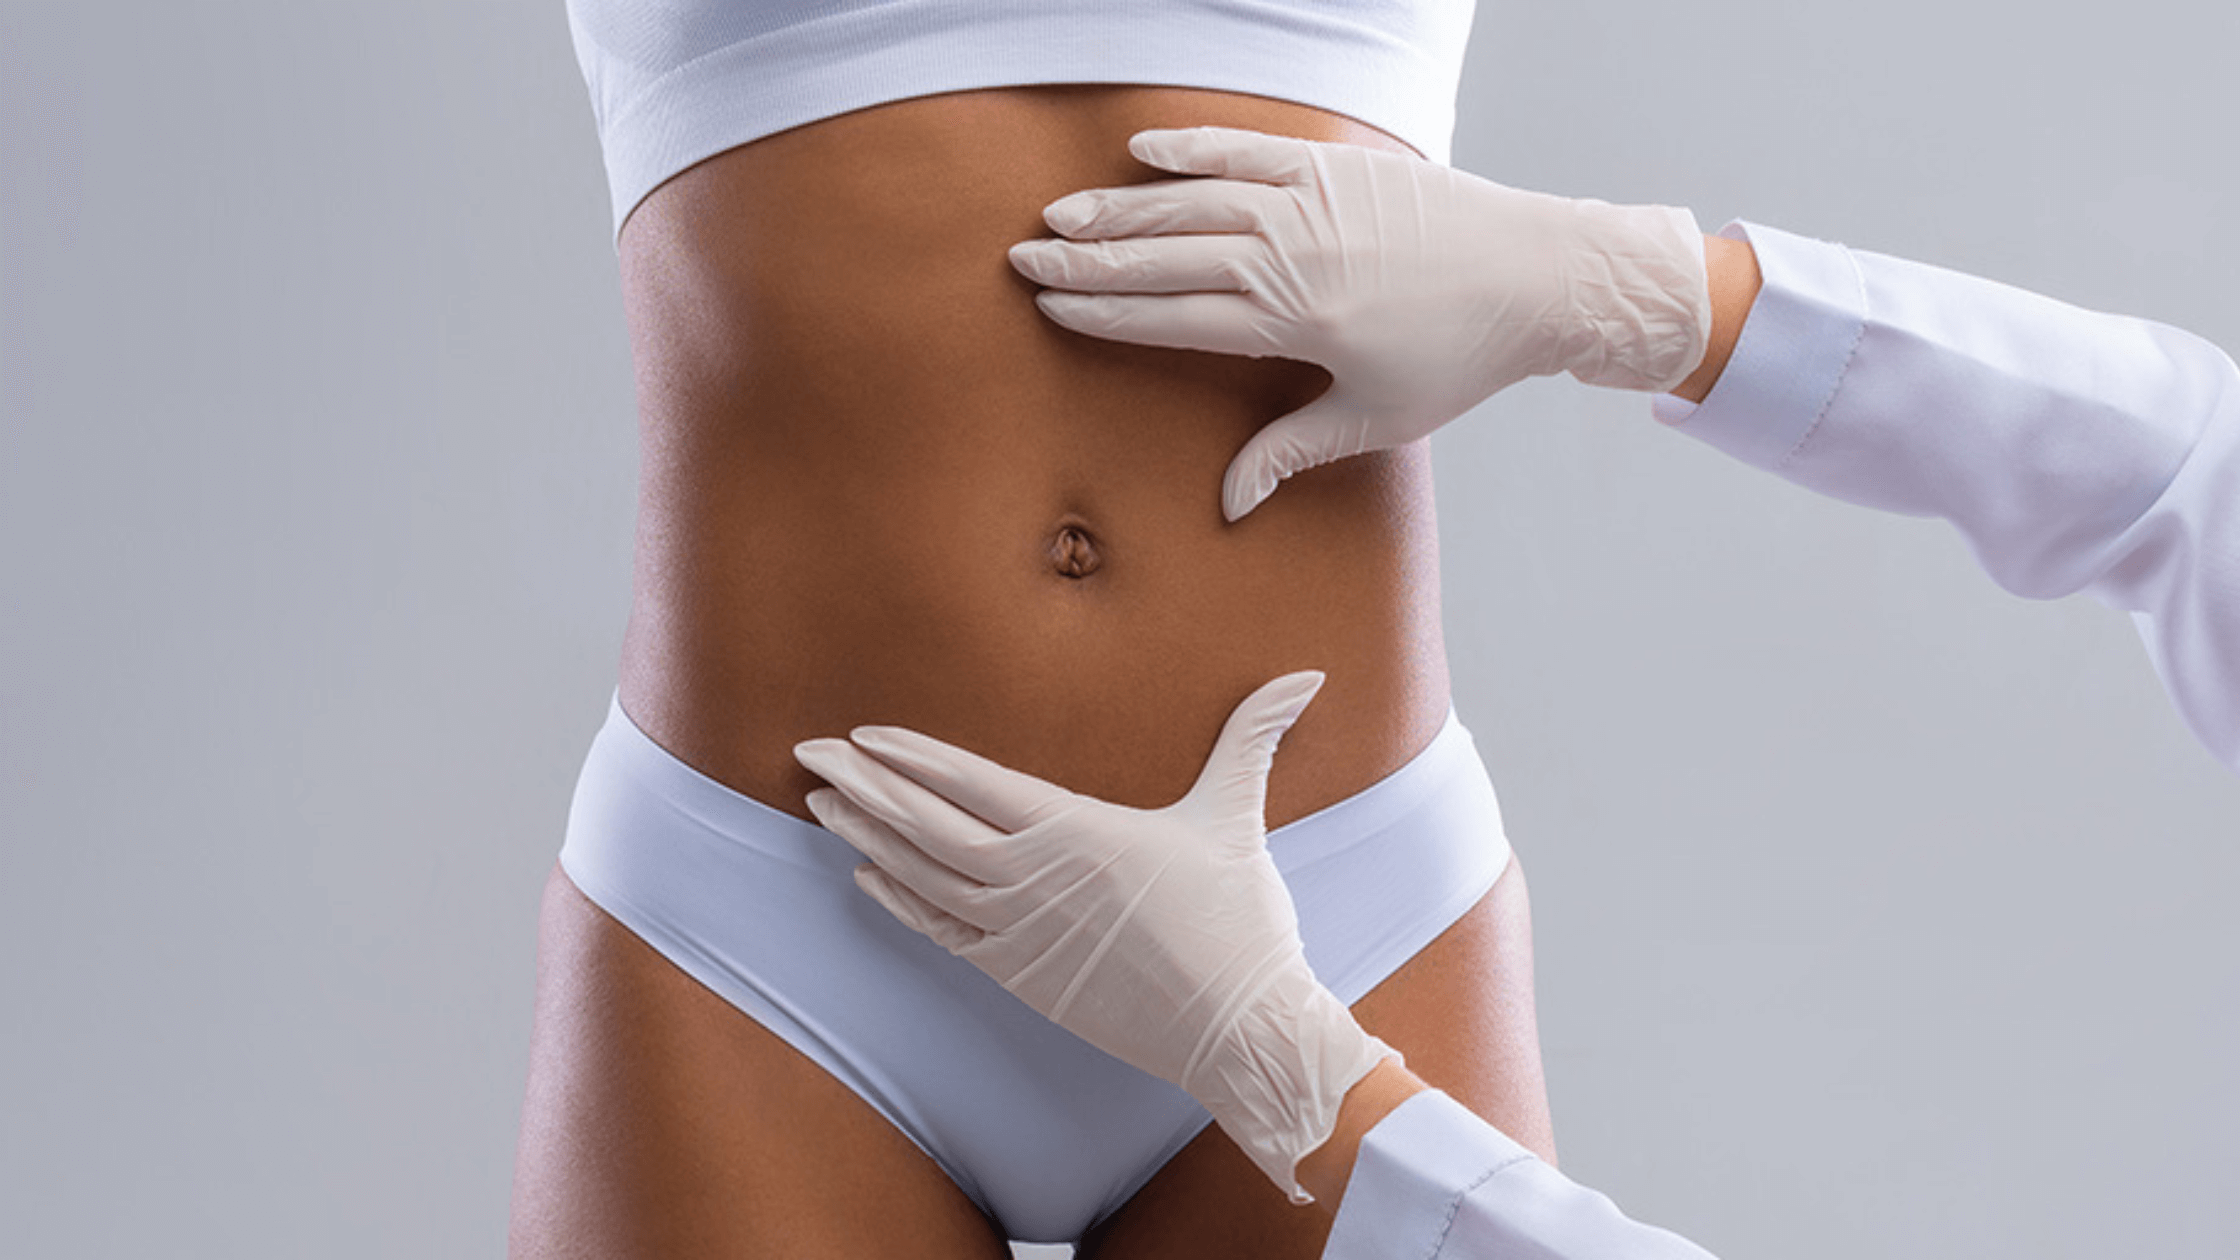 How Long After a Tummy Tuck Can You Have Intercourse?